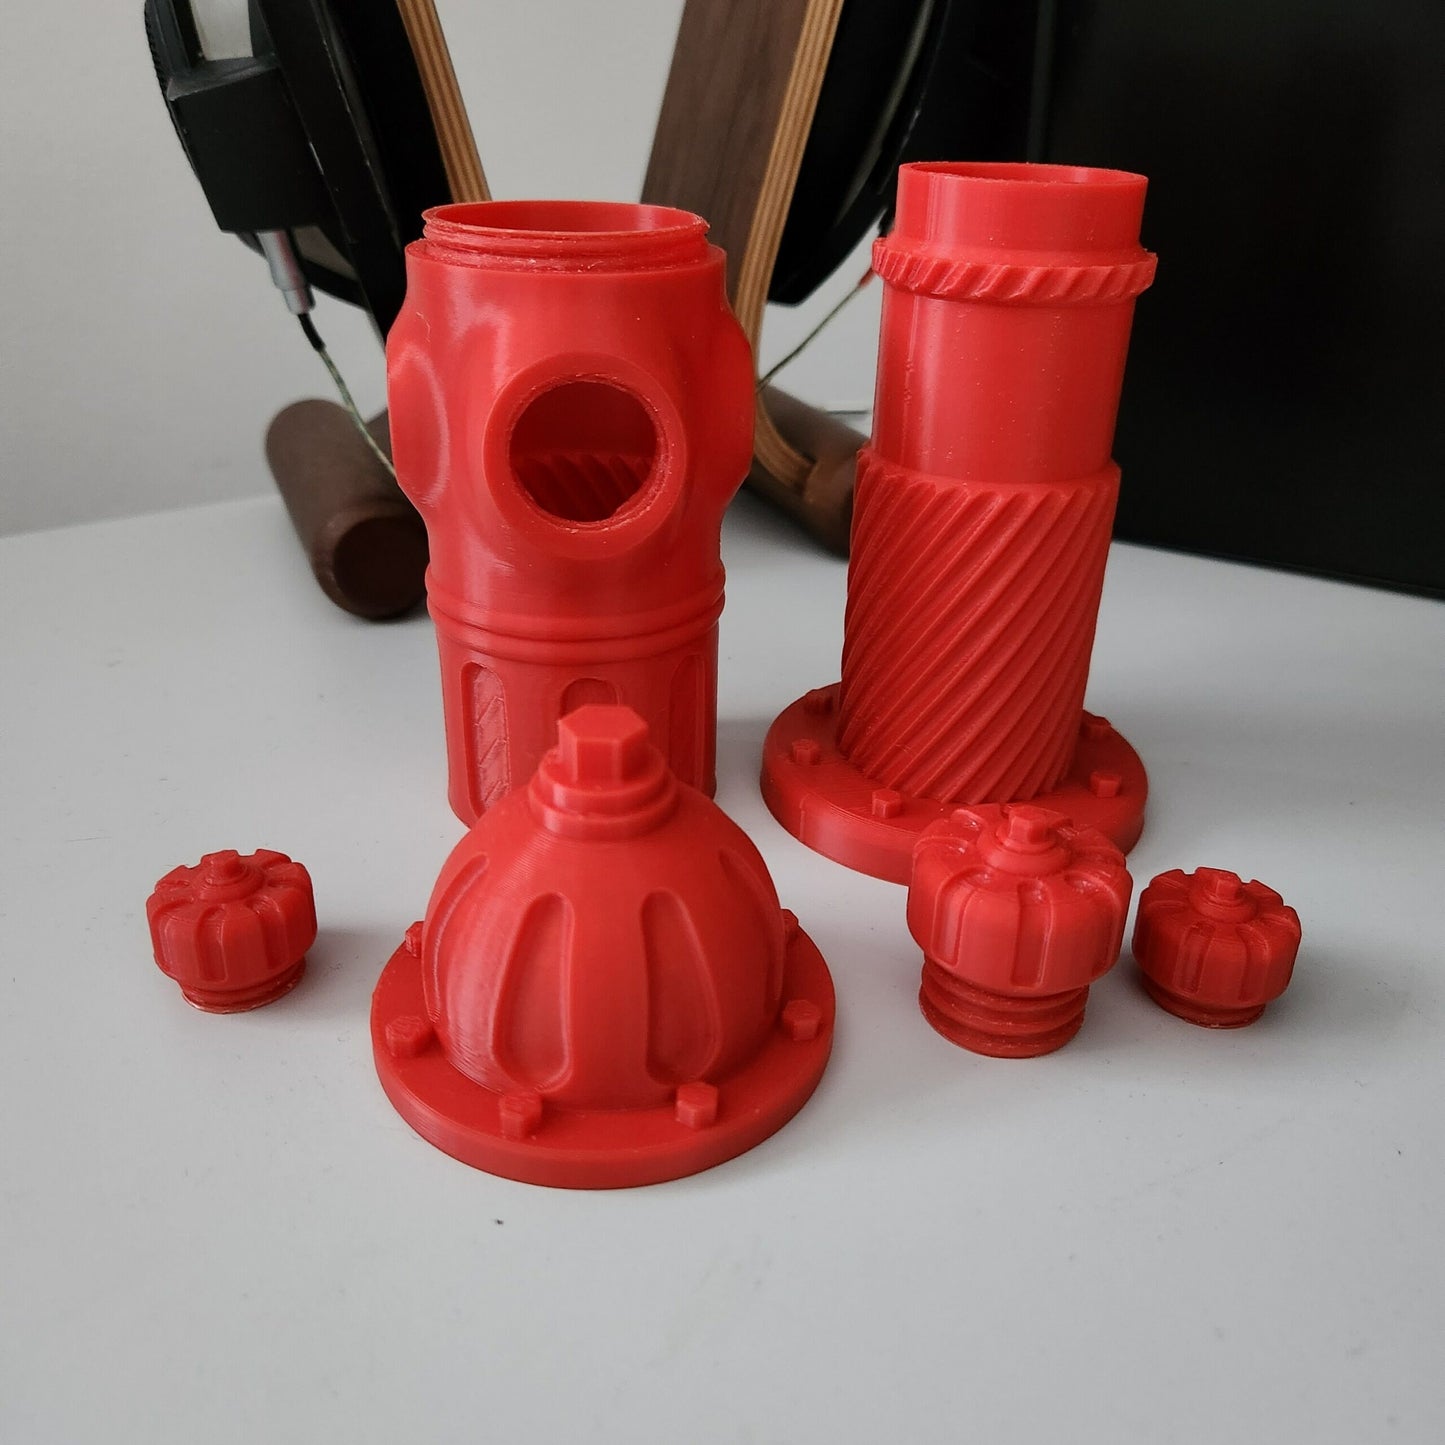 3d-printed-fire-hydrant-container